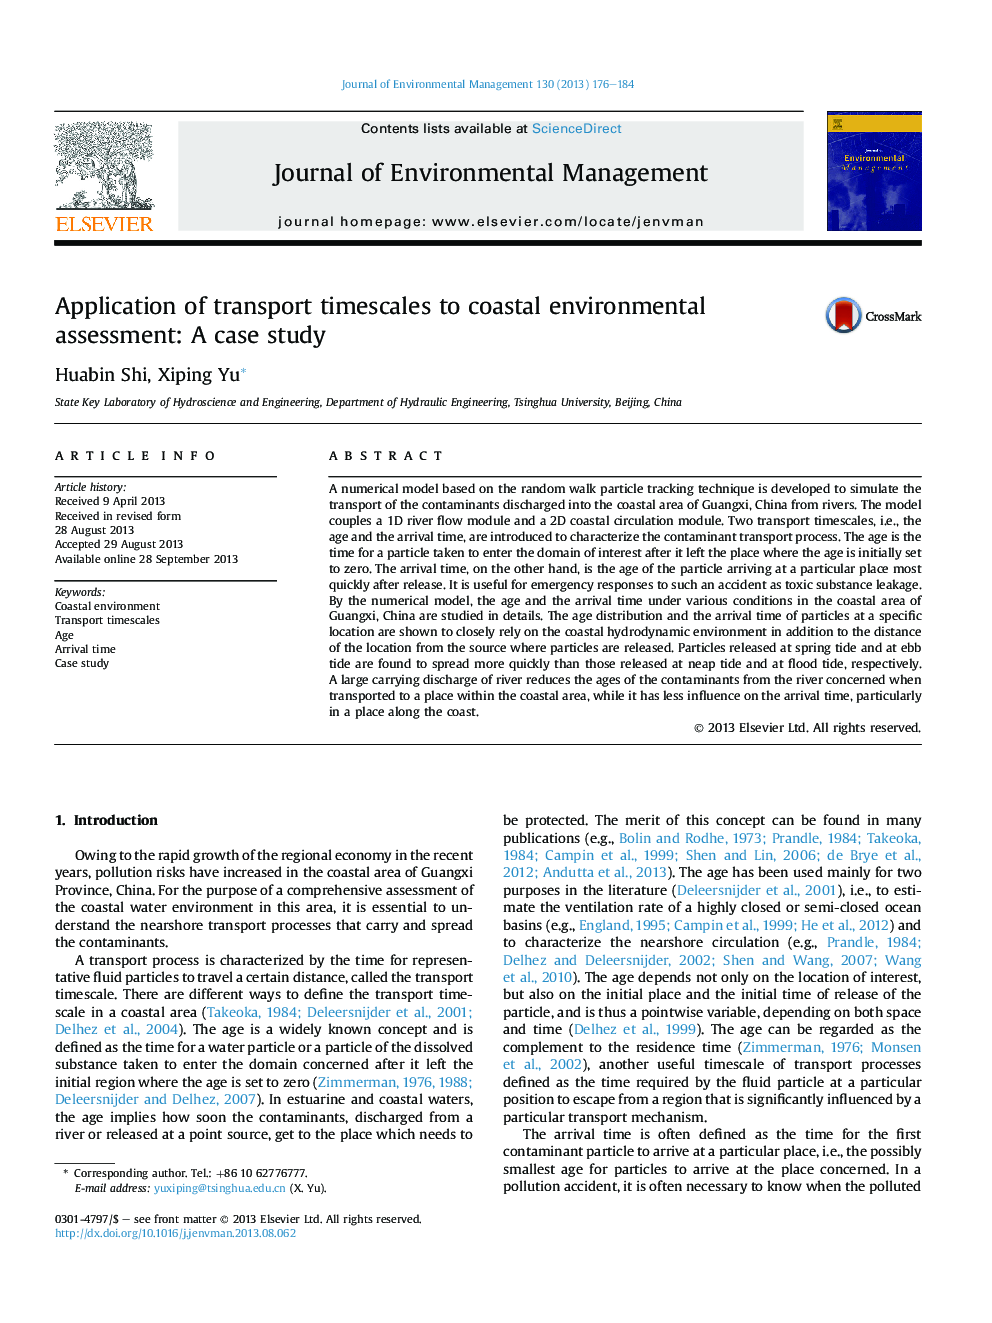 Application of transport timescales to coastal environmental assessment: A case study